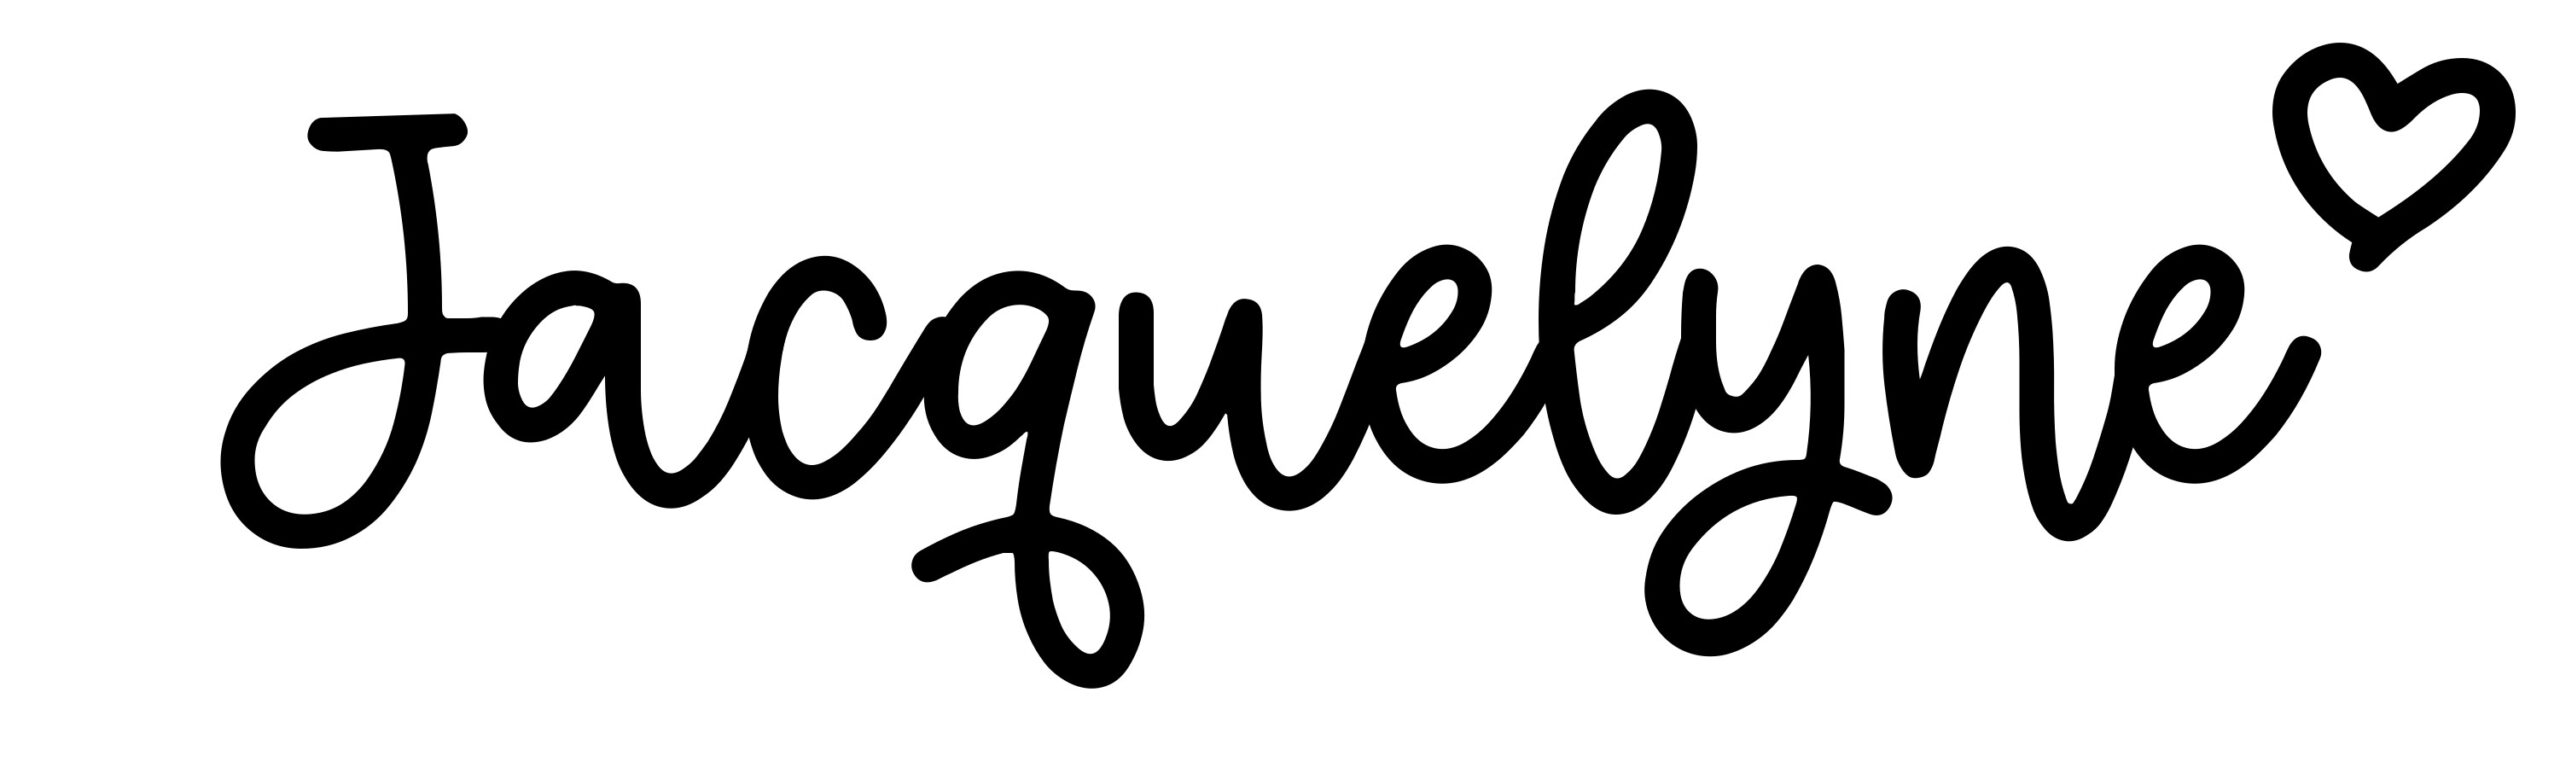 Jacquelyne - Name meaning, origin, variations and more